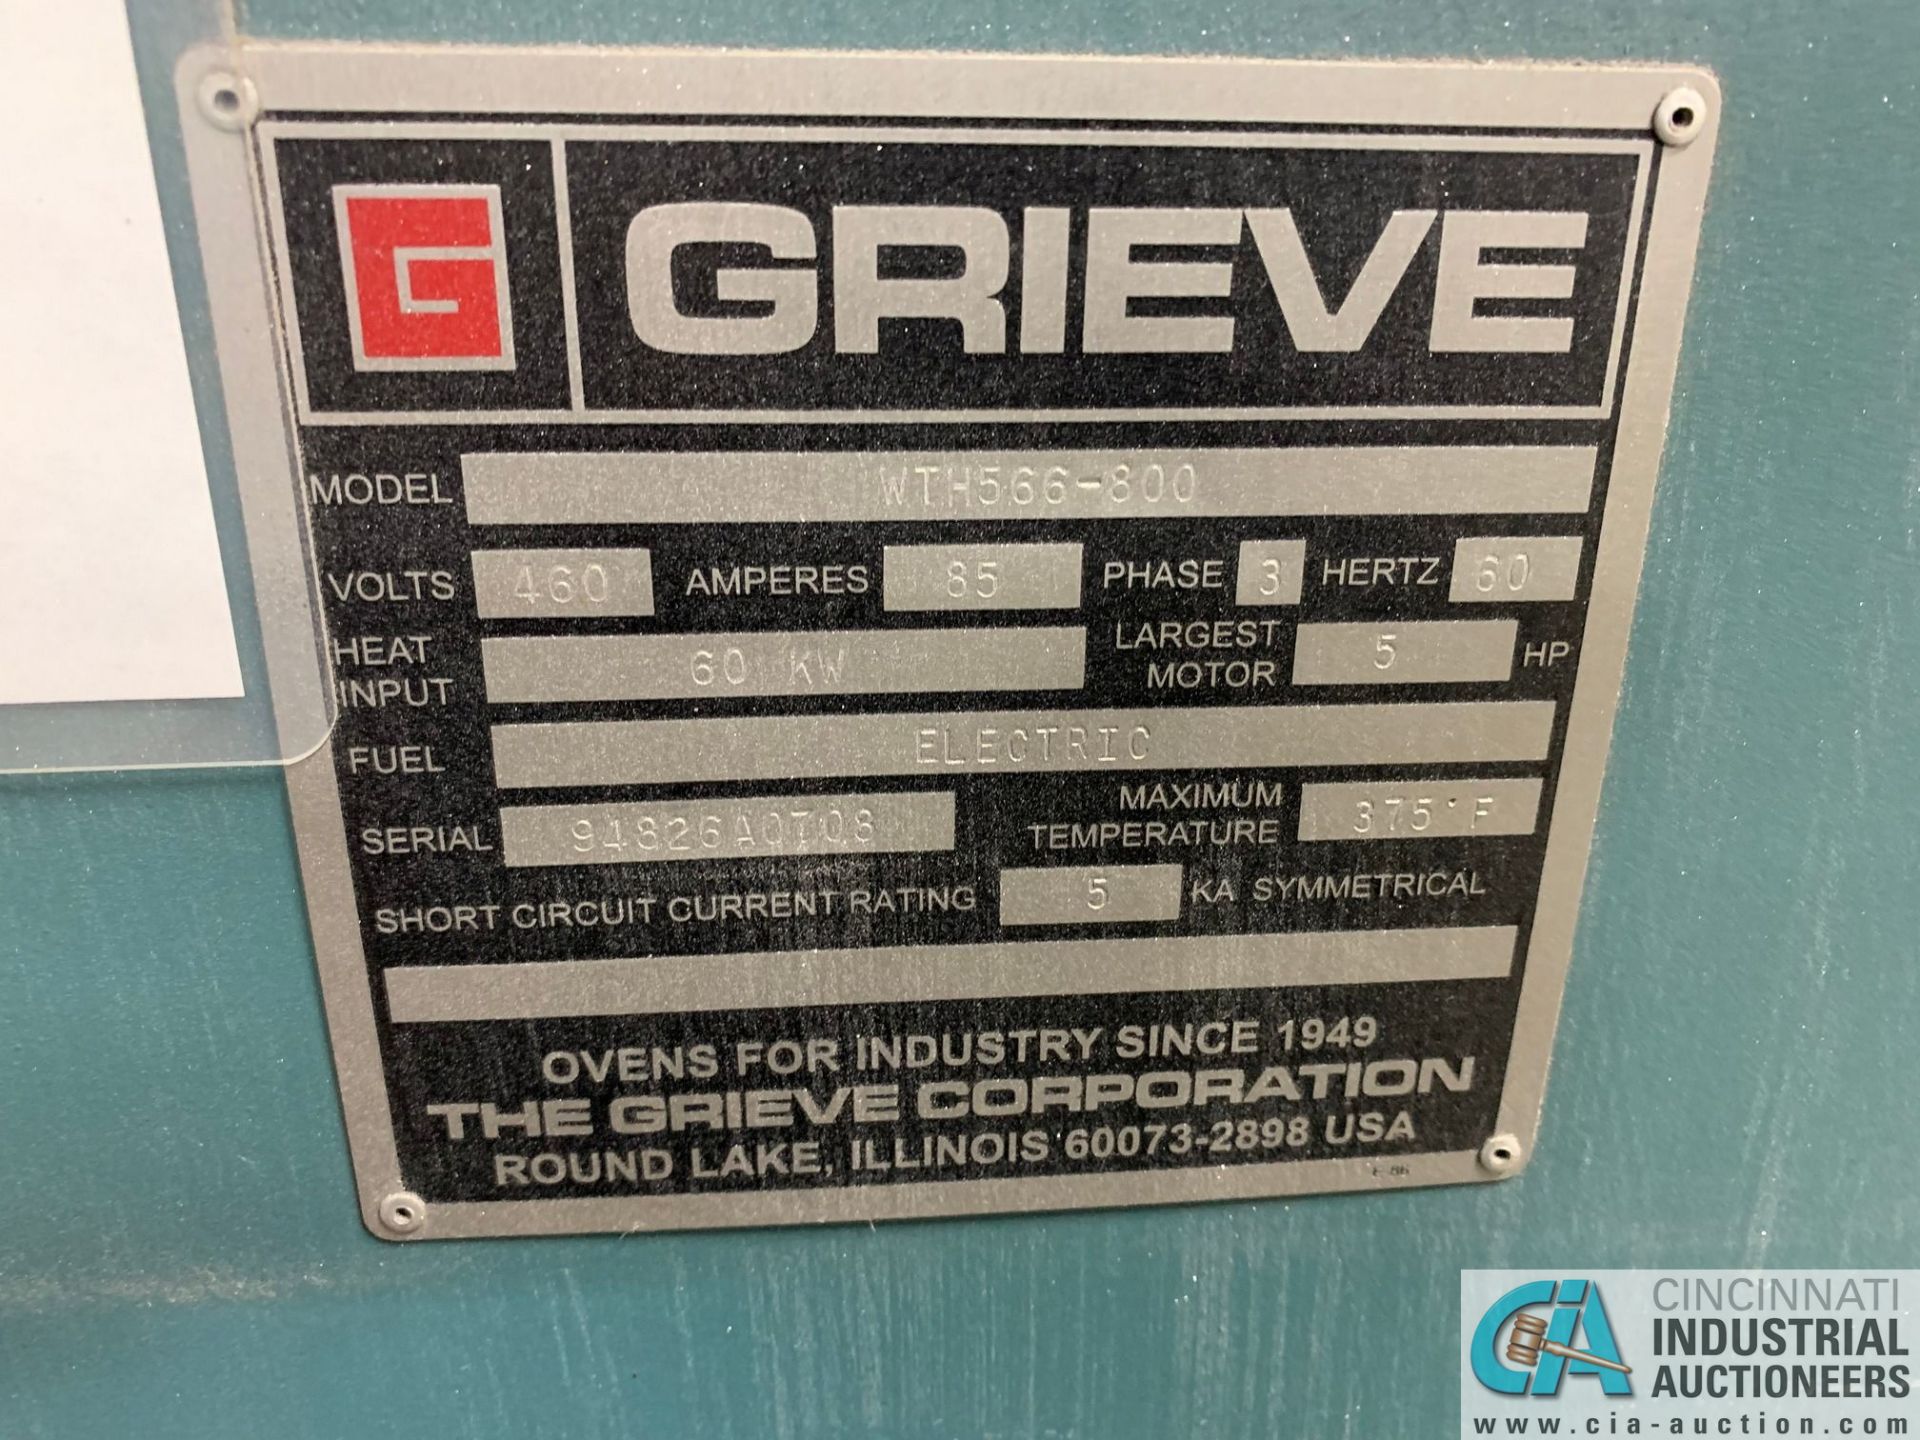 5' X 6' X 7' HIGH (APPROX.) GRIEVE MODEL WTH-566-800 ELECTRIC BATCH OVEN; S/N 94826A0708, 375 DEGREE - Image 7 of 12